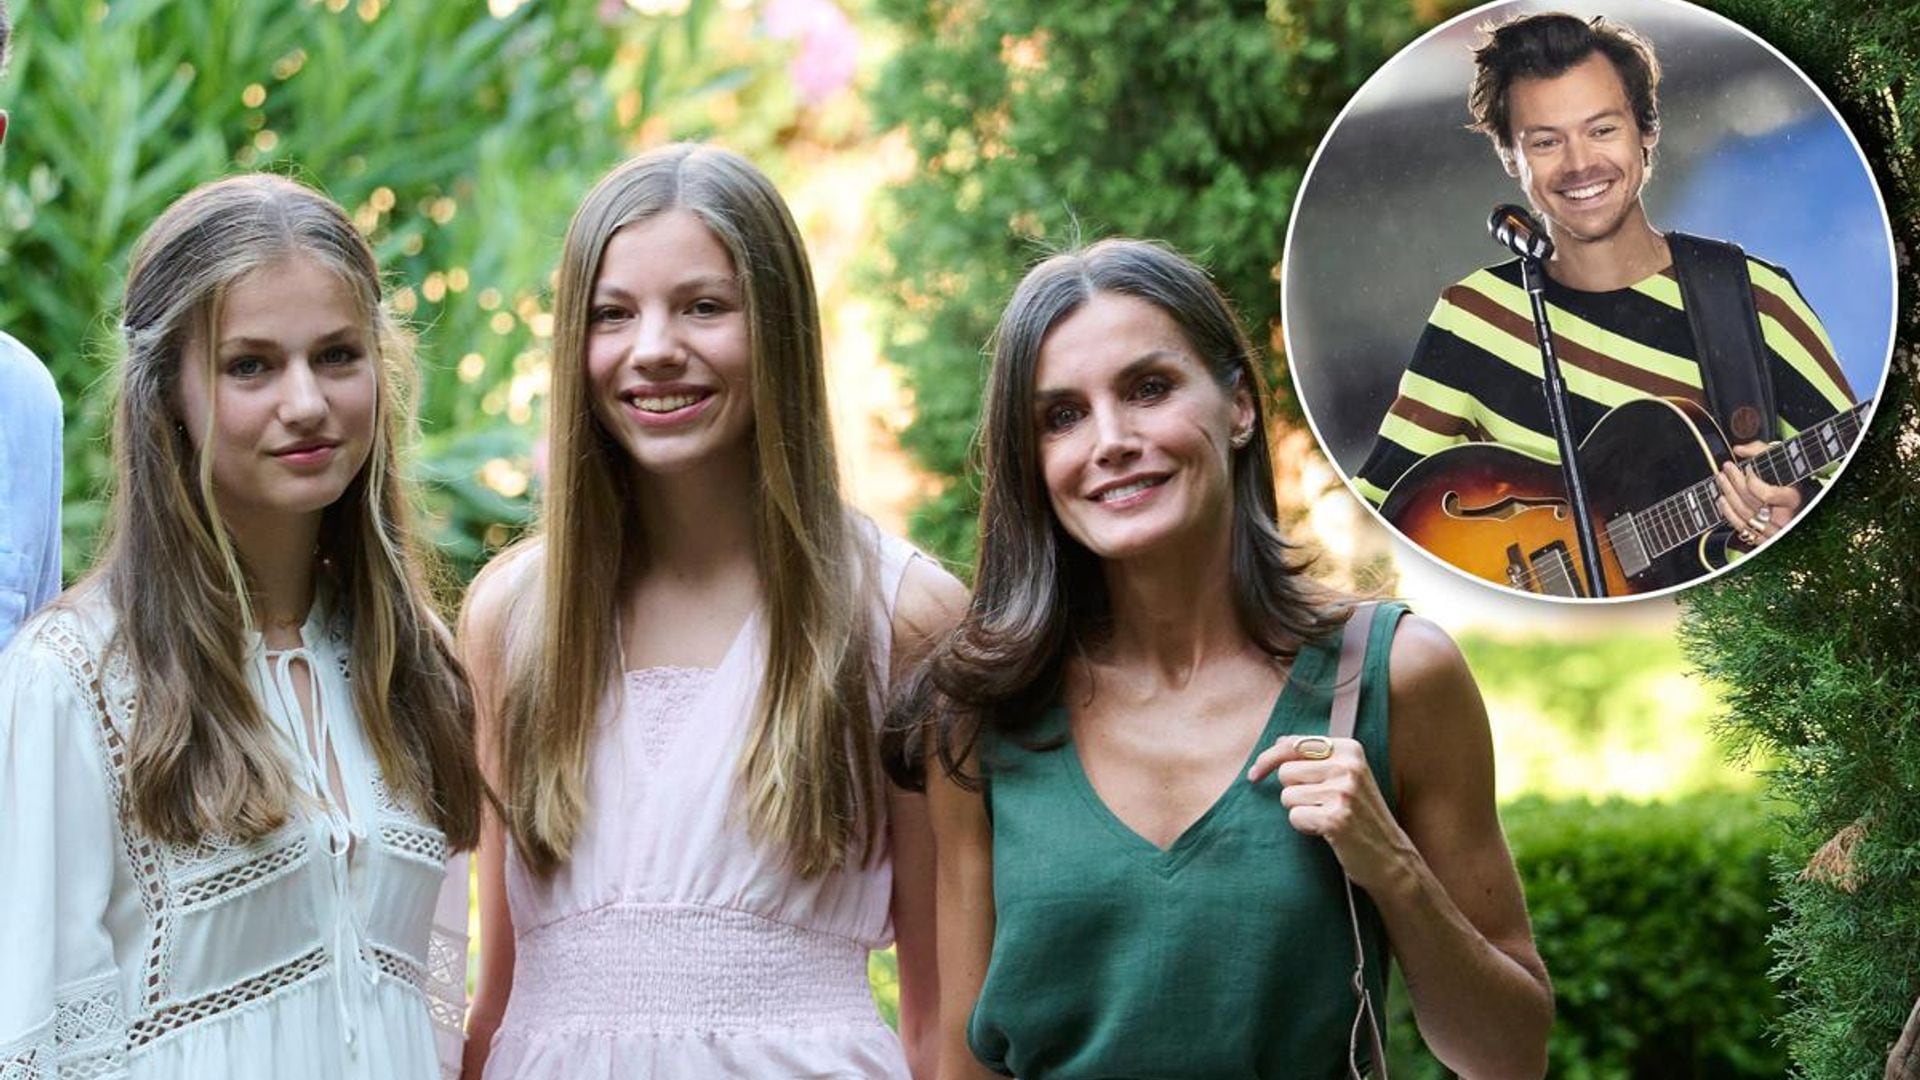 Queen Letizia attended a Harry Styles concert with her daughters: Report